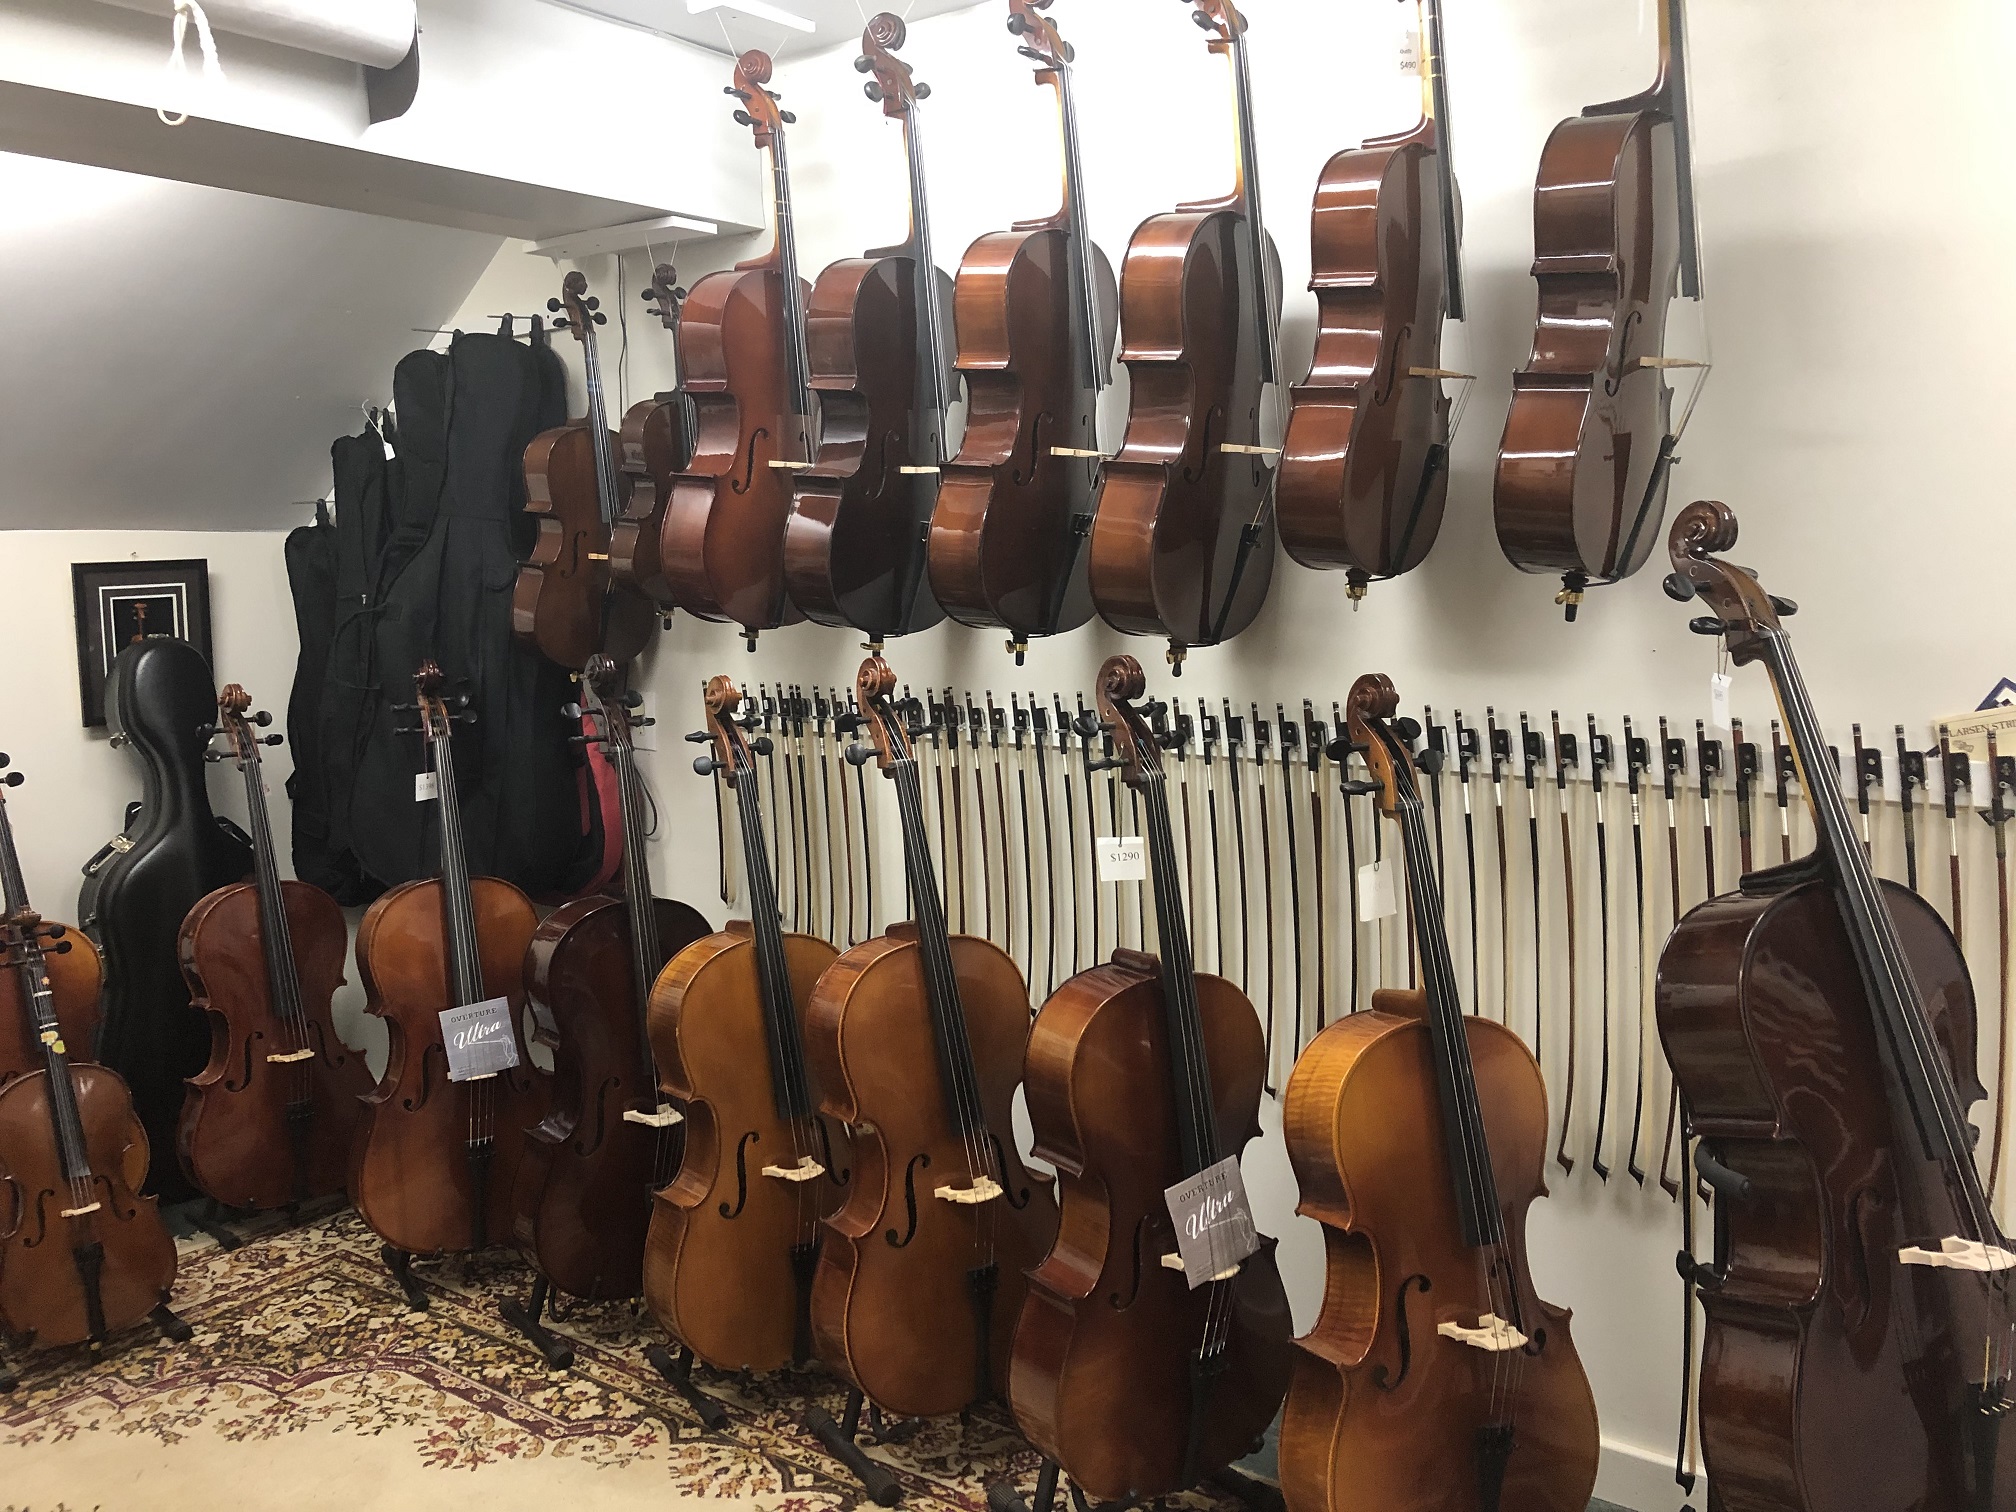 Cellos and bows on display